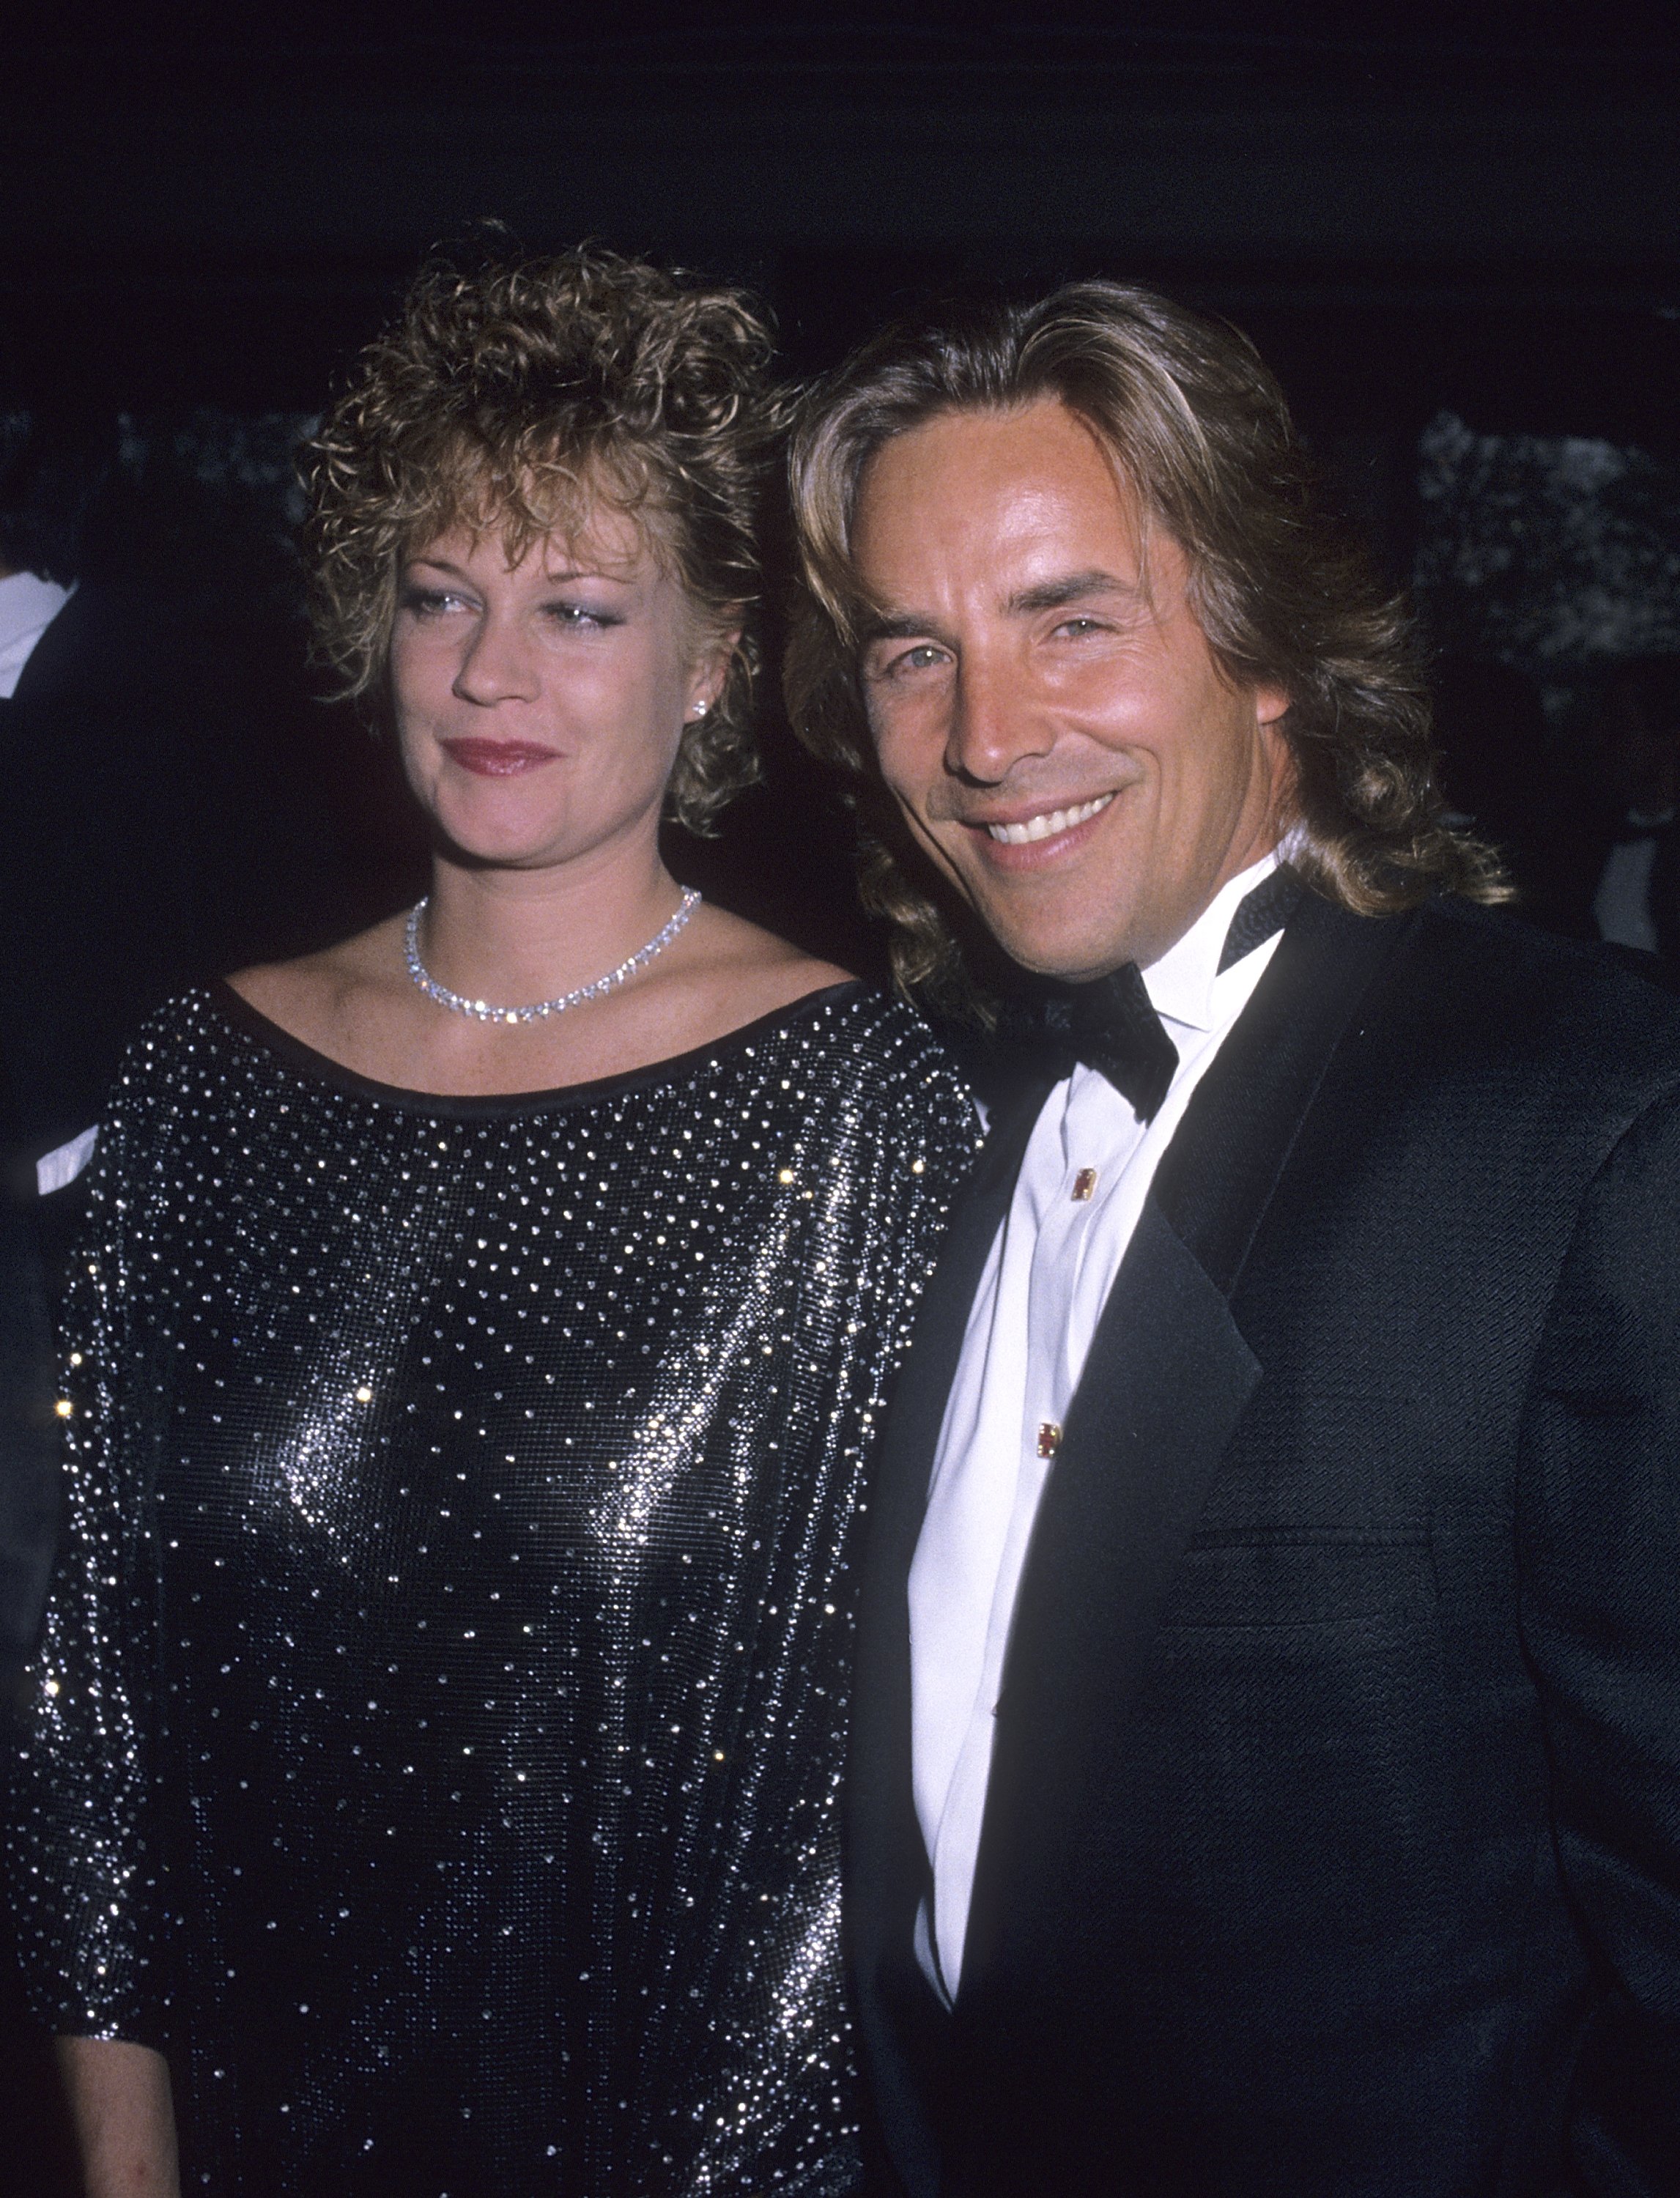  Melanie Griffith and actor Don Johnson attend the Police Athletic League's 17th Annual Superstar Dinner Salute to Donald Trump on May 12, 1989  | Source: Getty Images